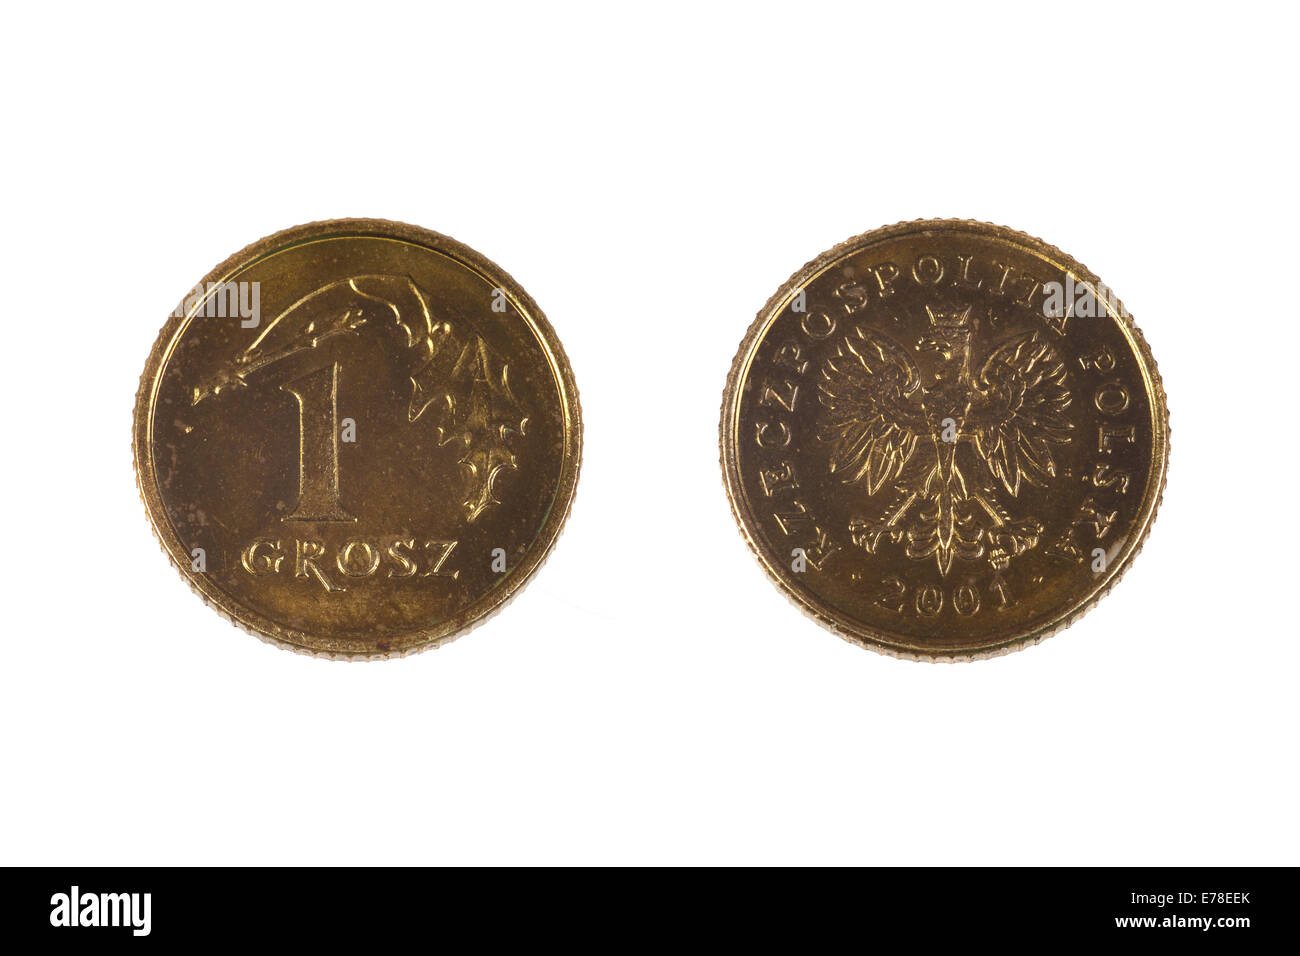 Polish coin denominations one grosz. Obsolete hundredth of zloty. Macro closeup of both sides isolated on white background Stock Photo